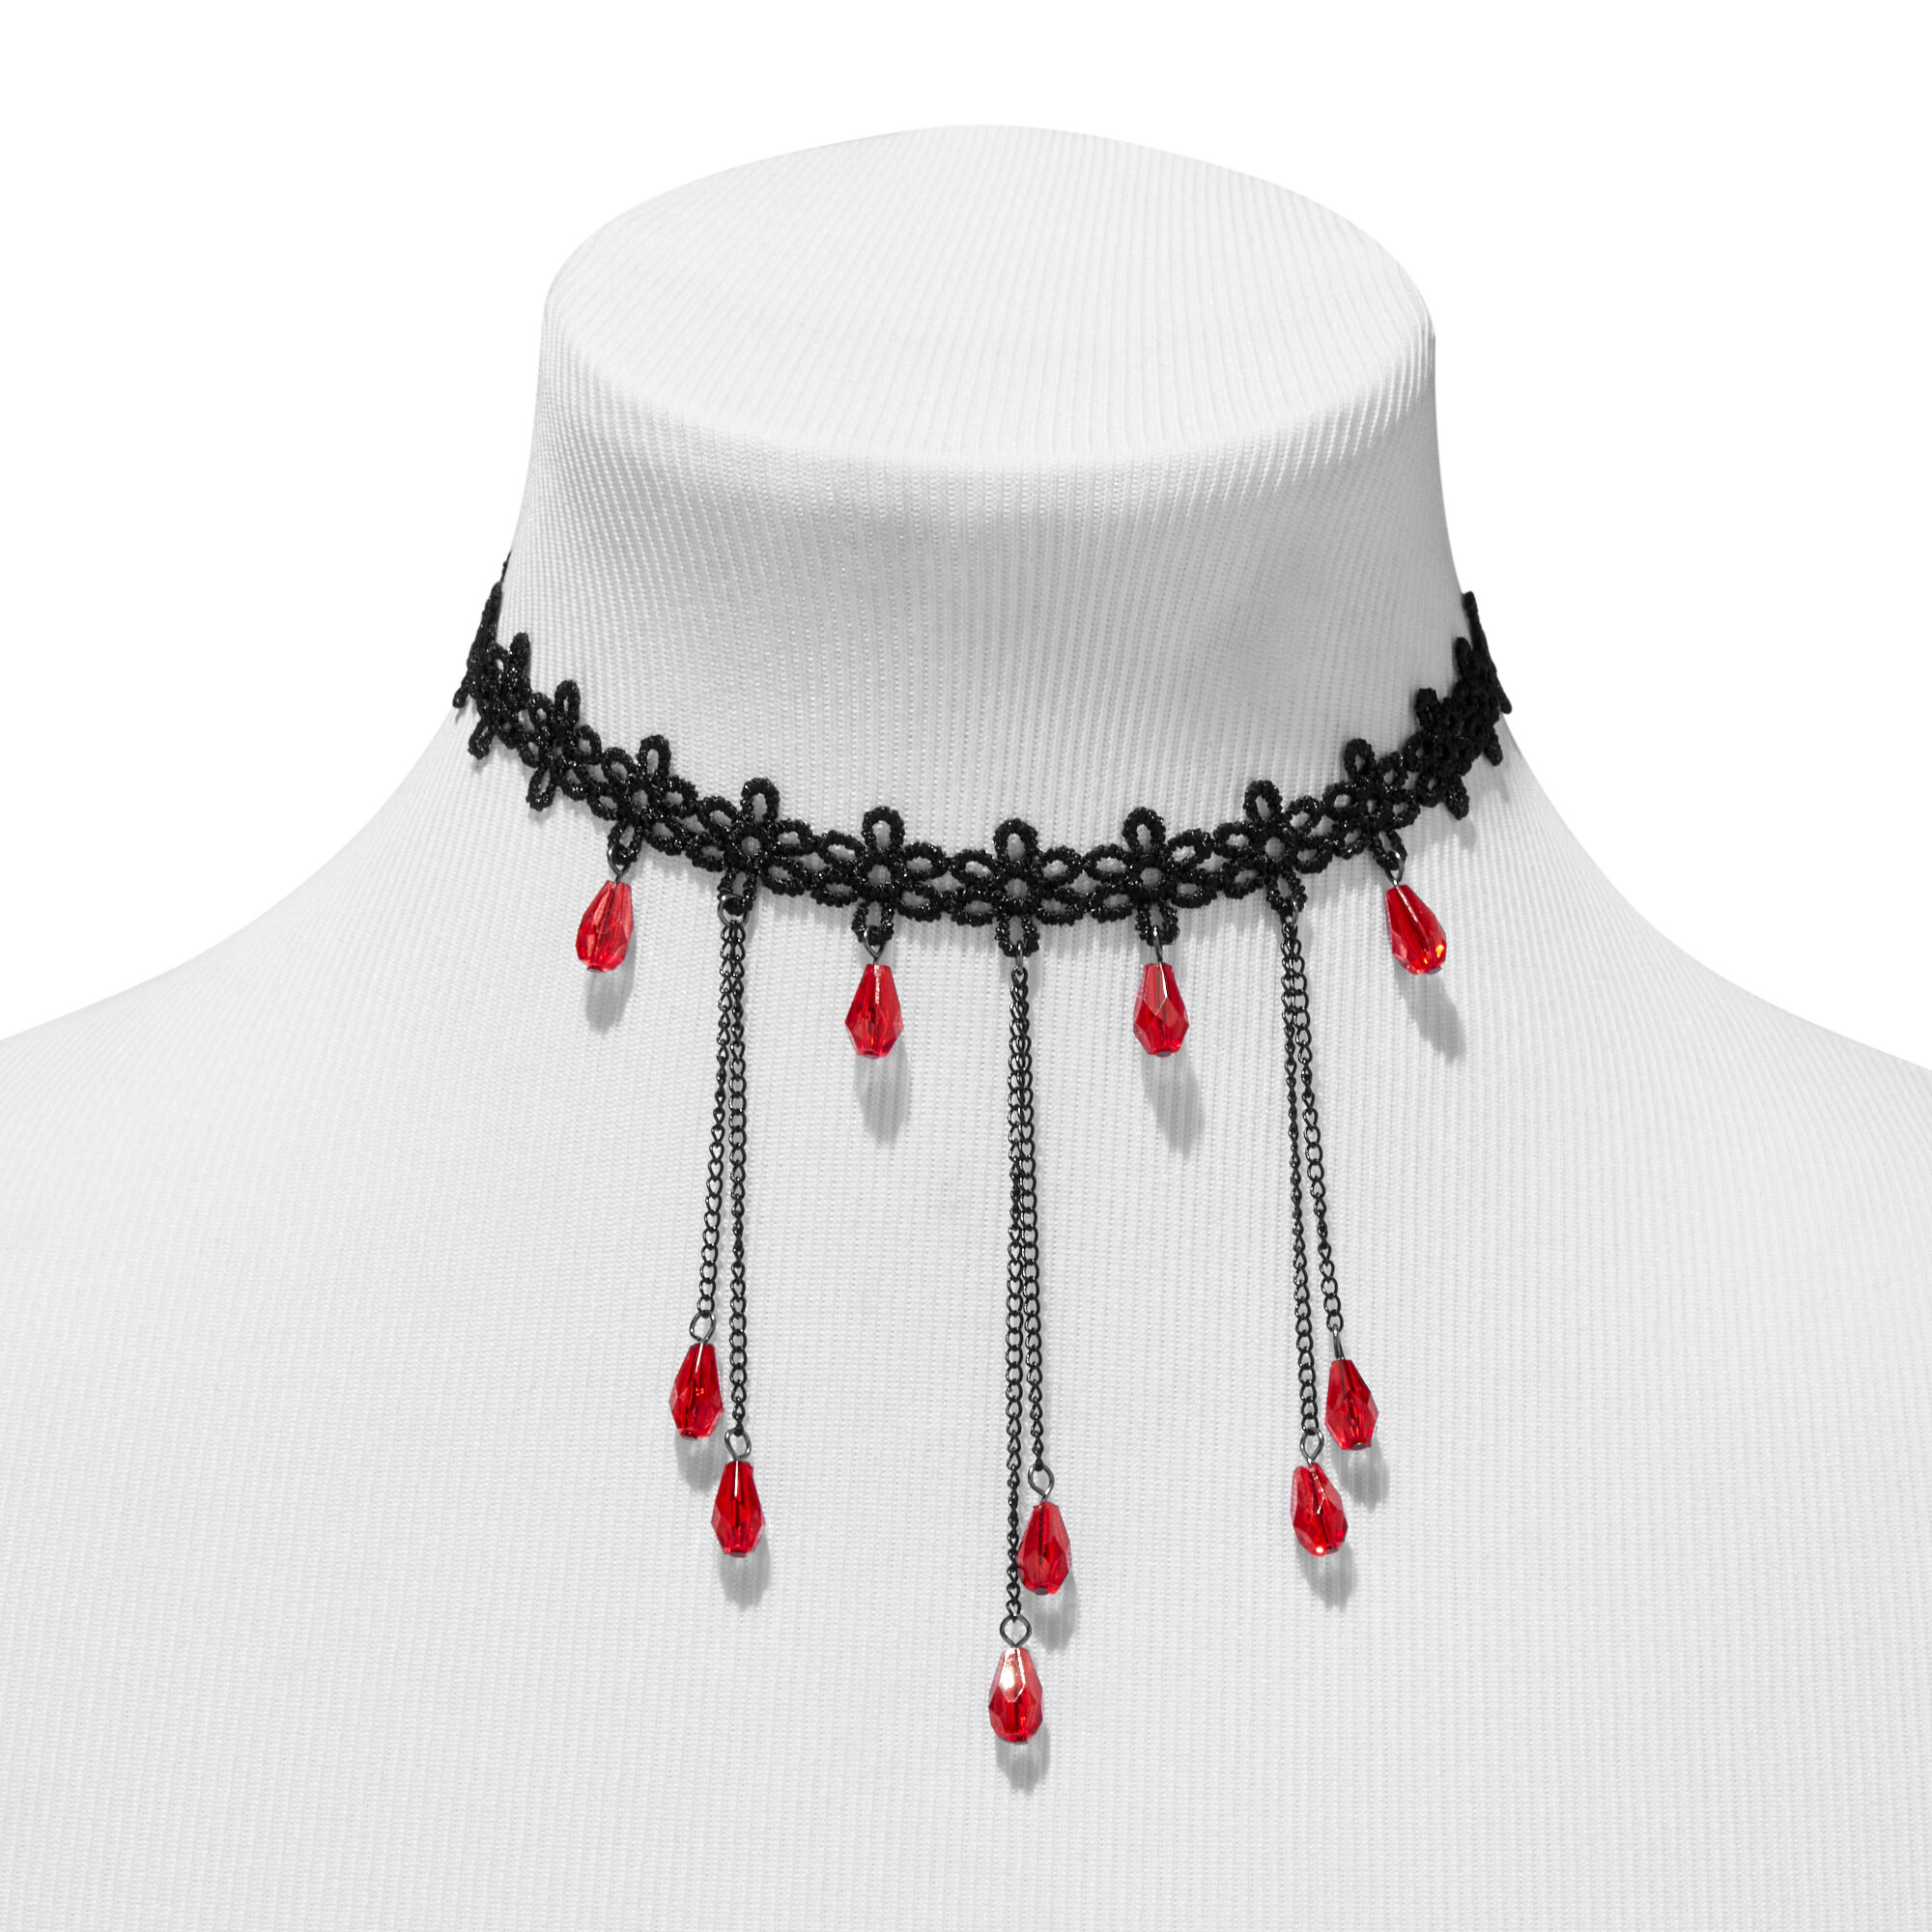 Infinite Love Necklace with Black Roses & Red Crystal Heart, Alchemy G